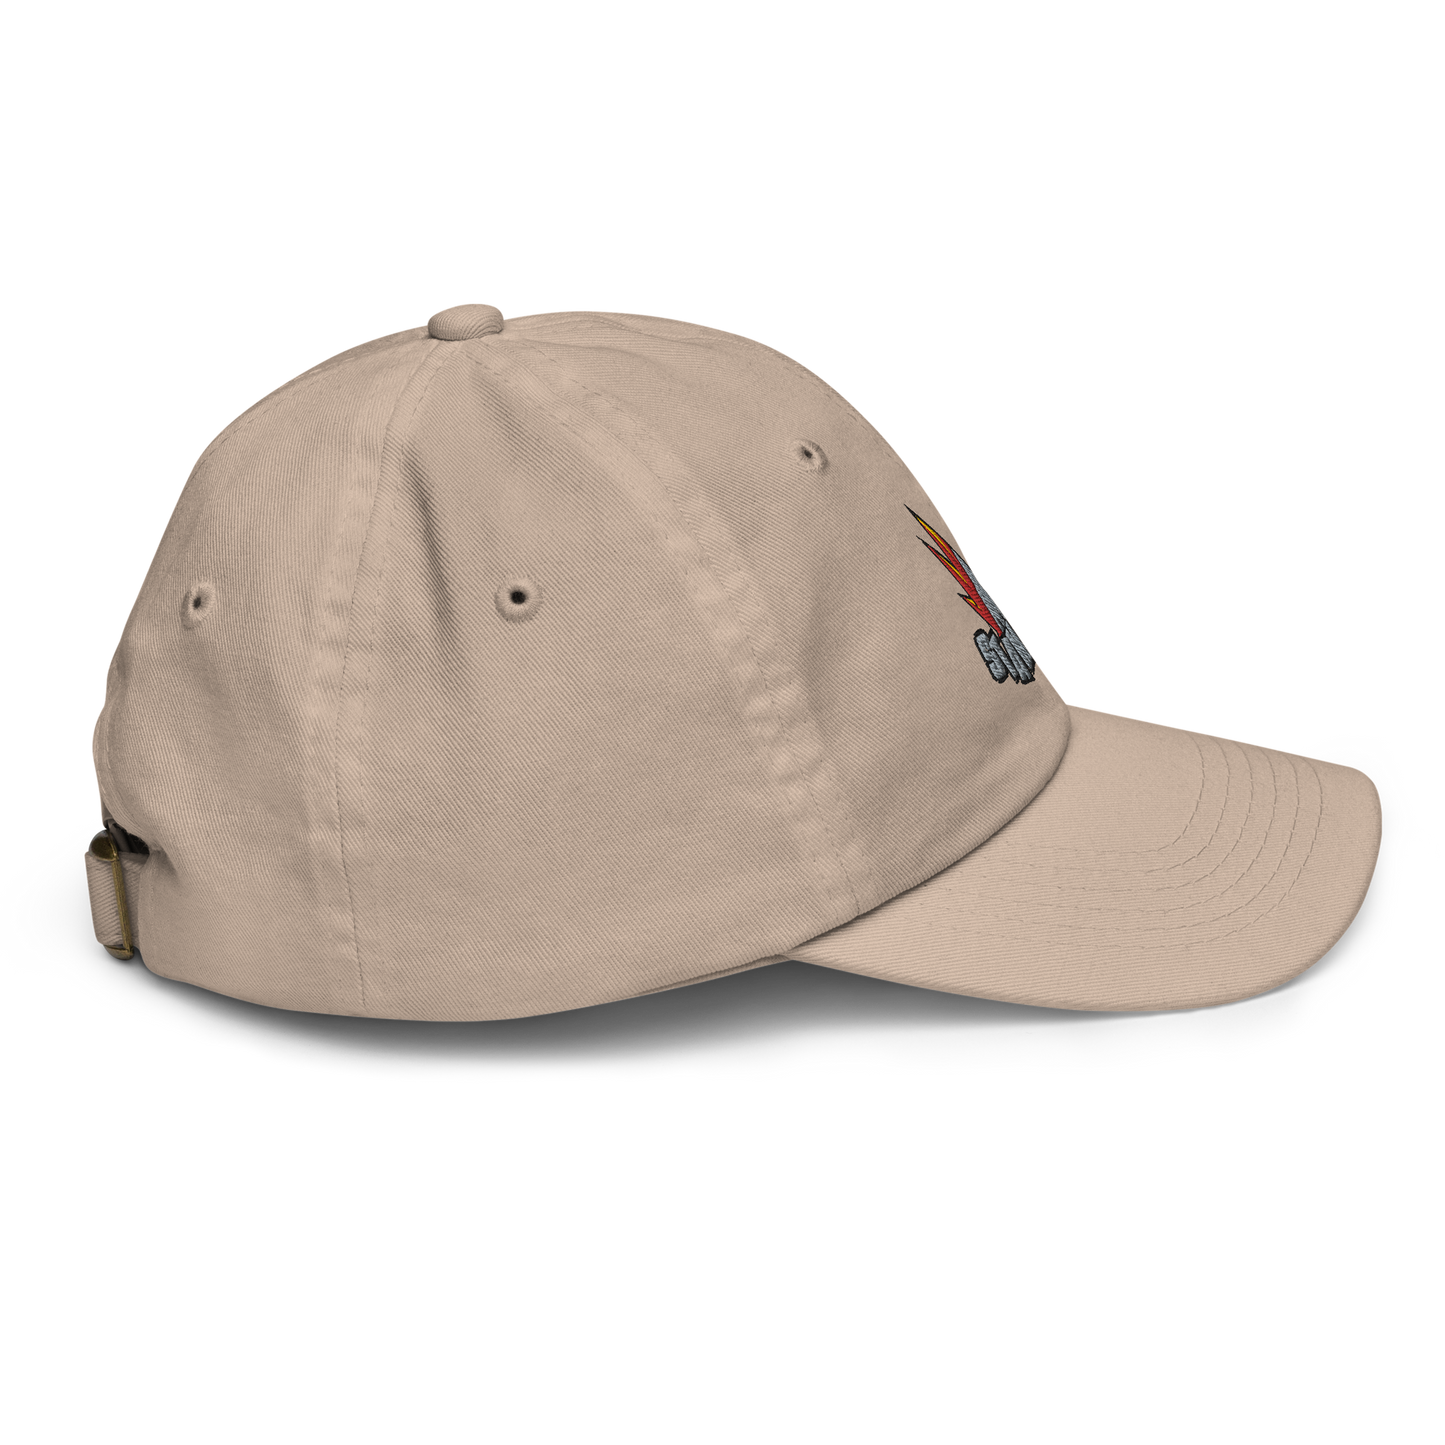 Zoo Jitsu Fighters Stampede Youth Baseball Cap - Icon Heroes 